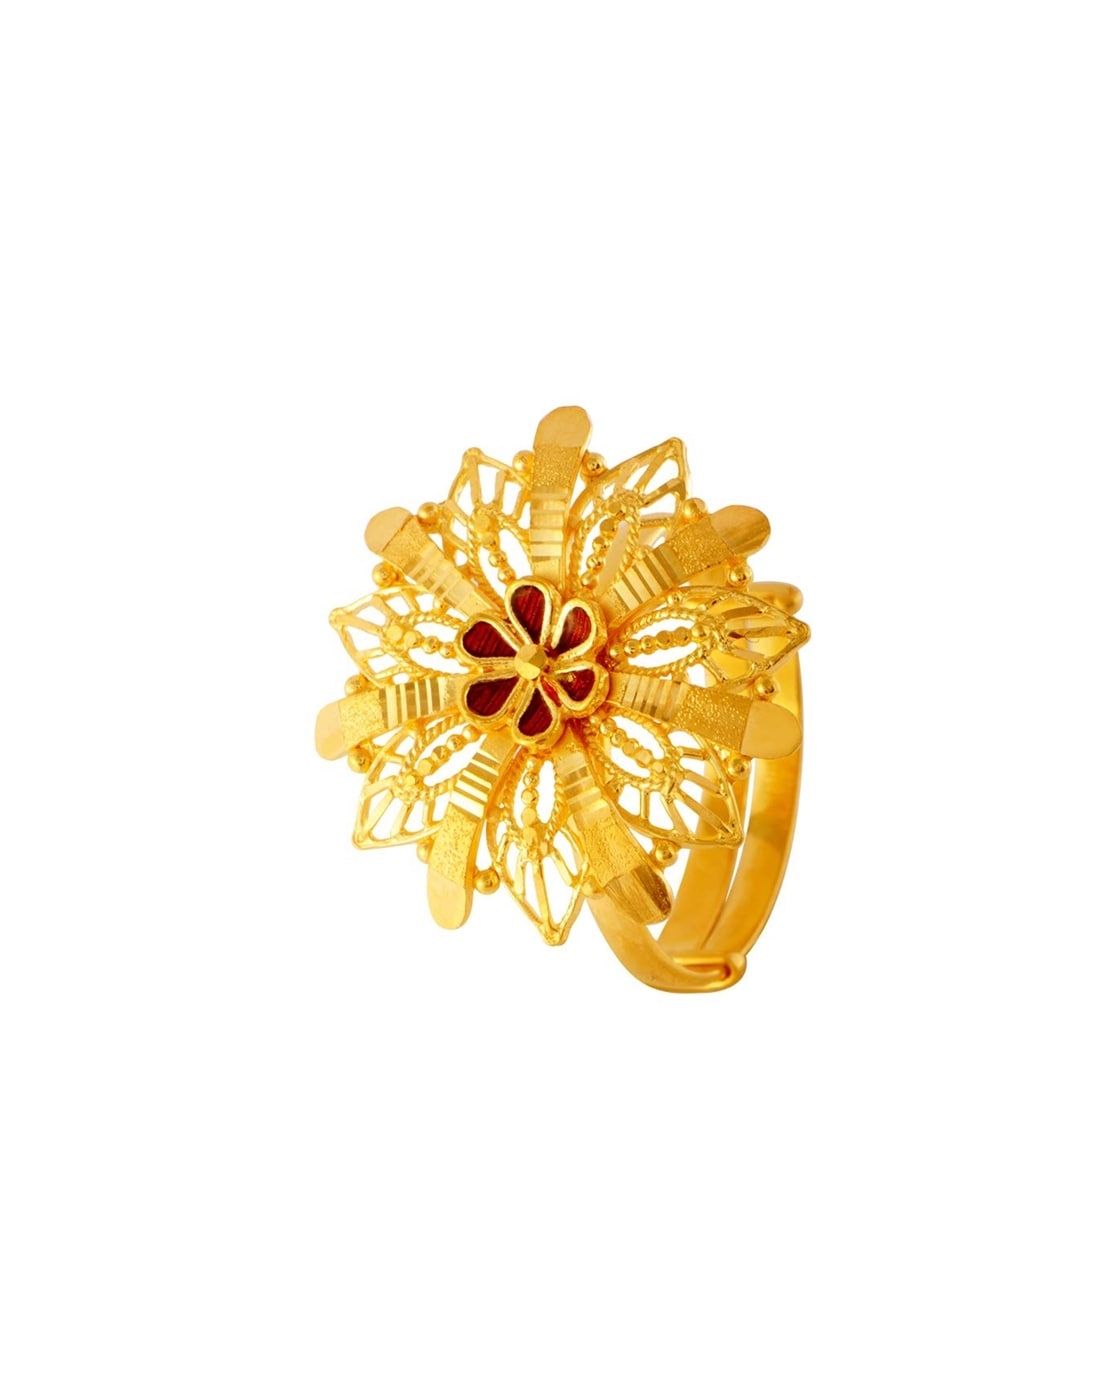 P.C. Chandra Jewellers 14KT (585) Gold Ring - 2.1 Grams : Amazon.in: Fashion